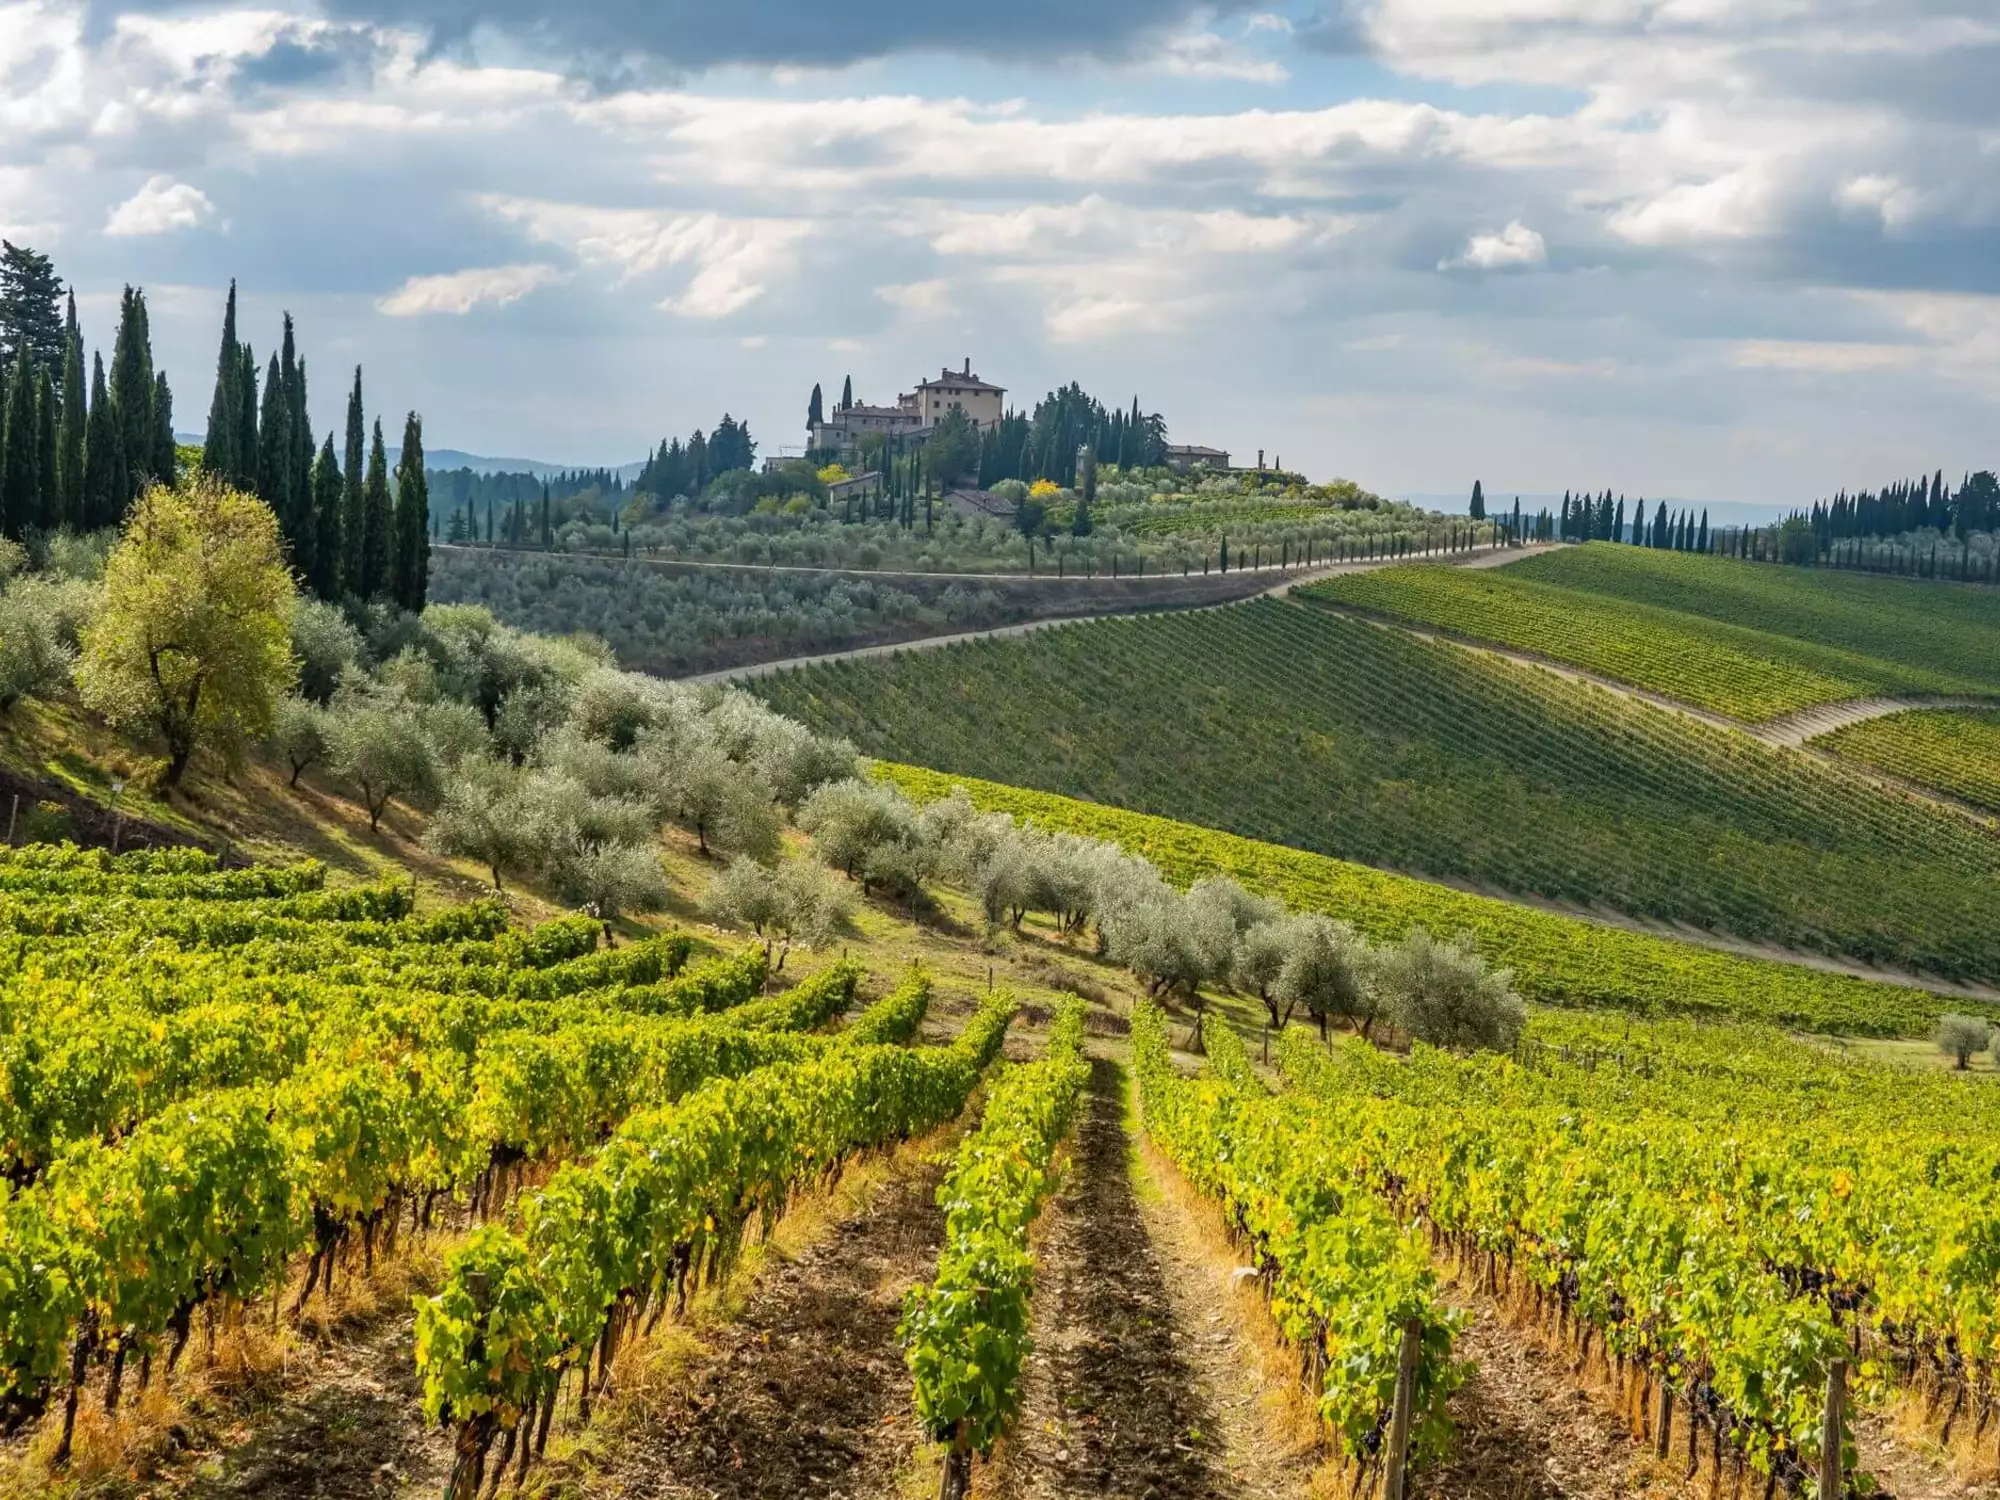 Hilly countryside with vineyards and the village Radda in Chianti, Tuscany (c) photo Rich Martello / Unsplash